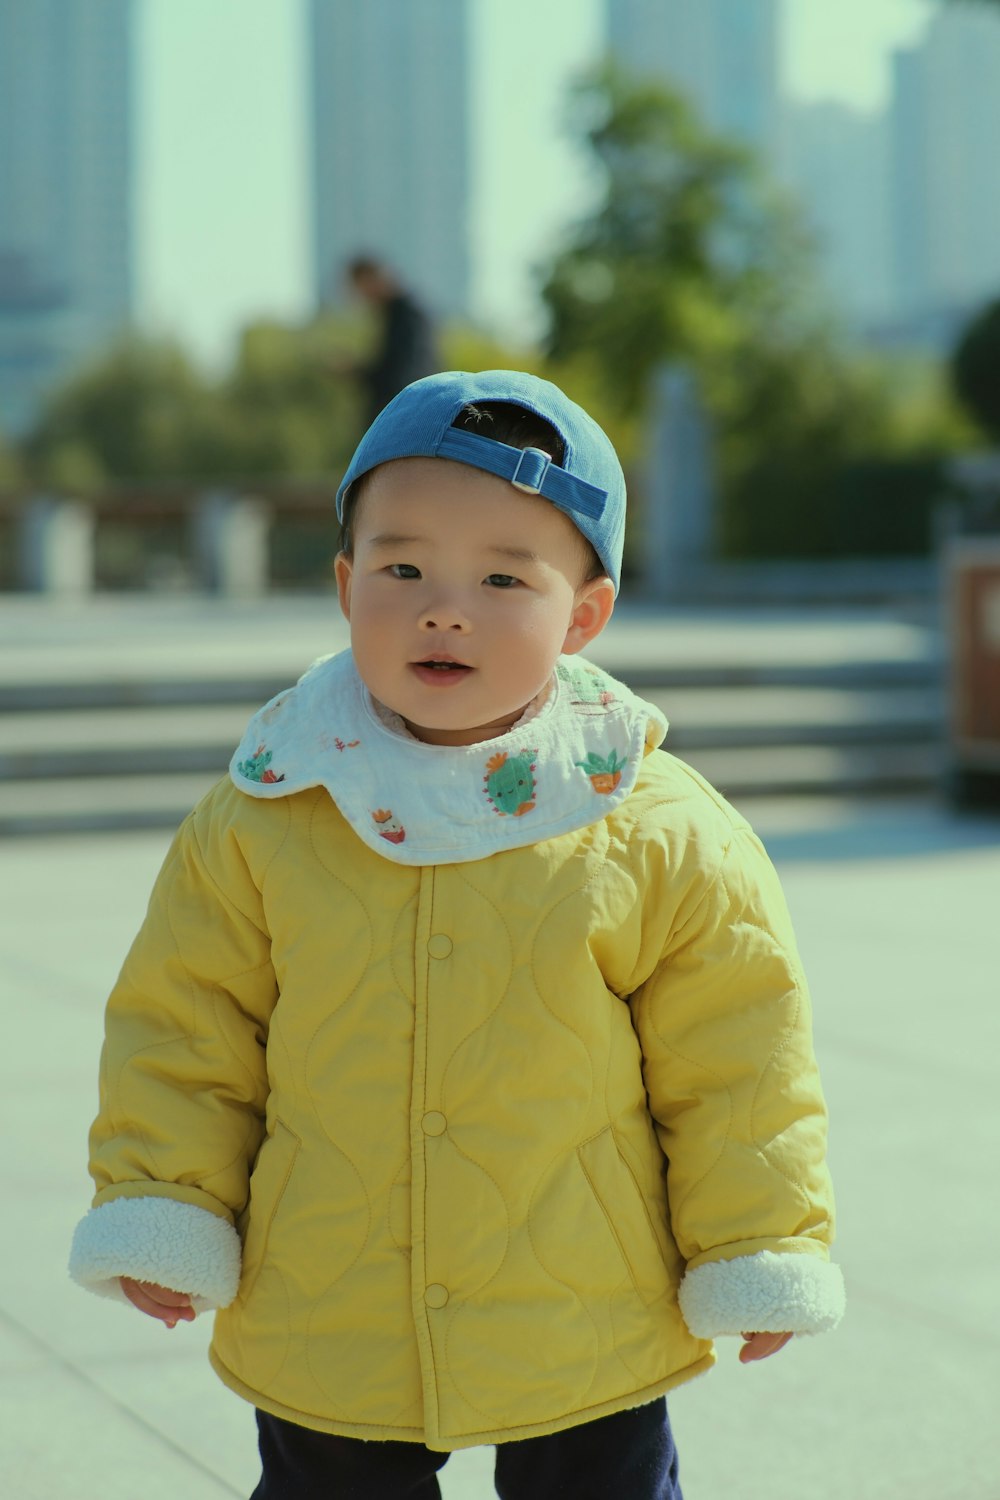 a little boy in a yellow jacket and a blue hat